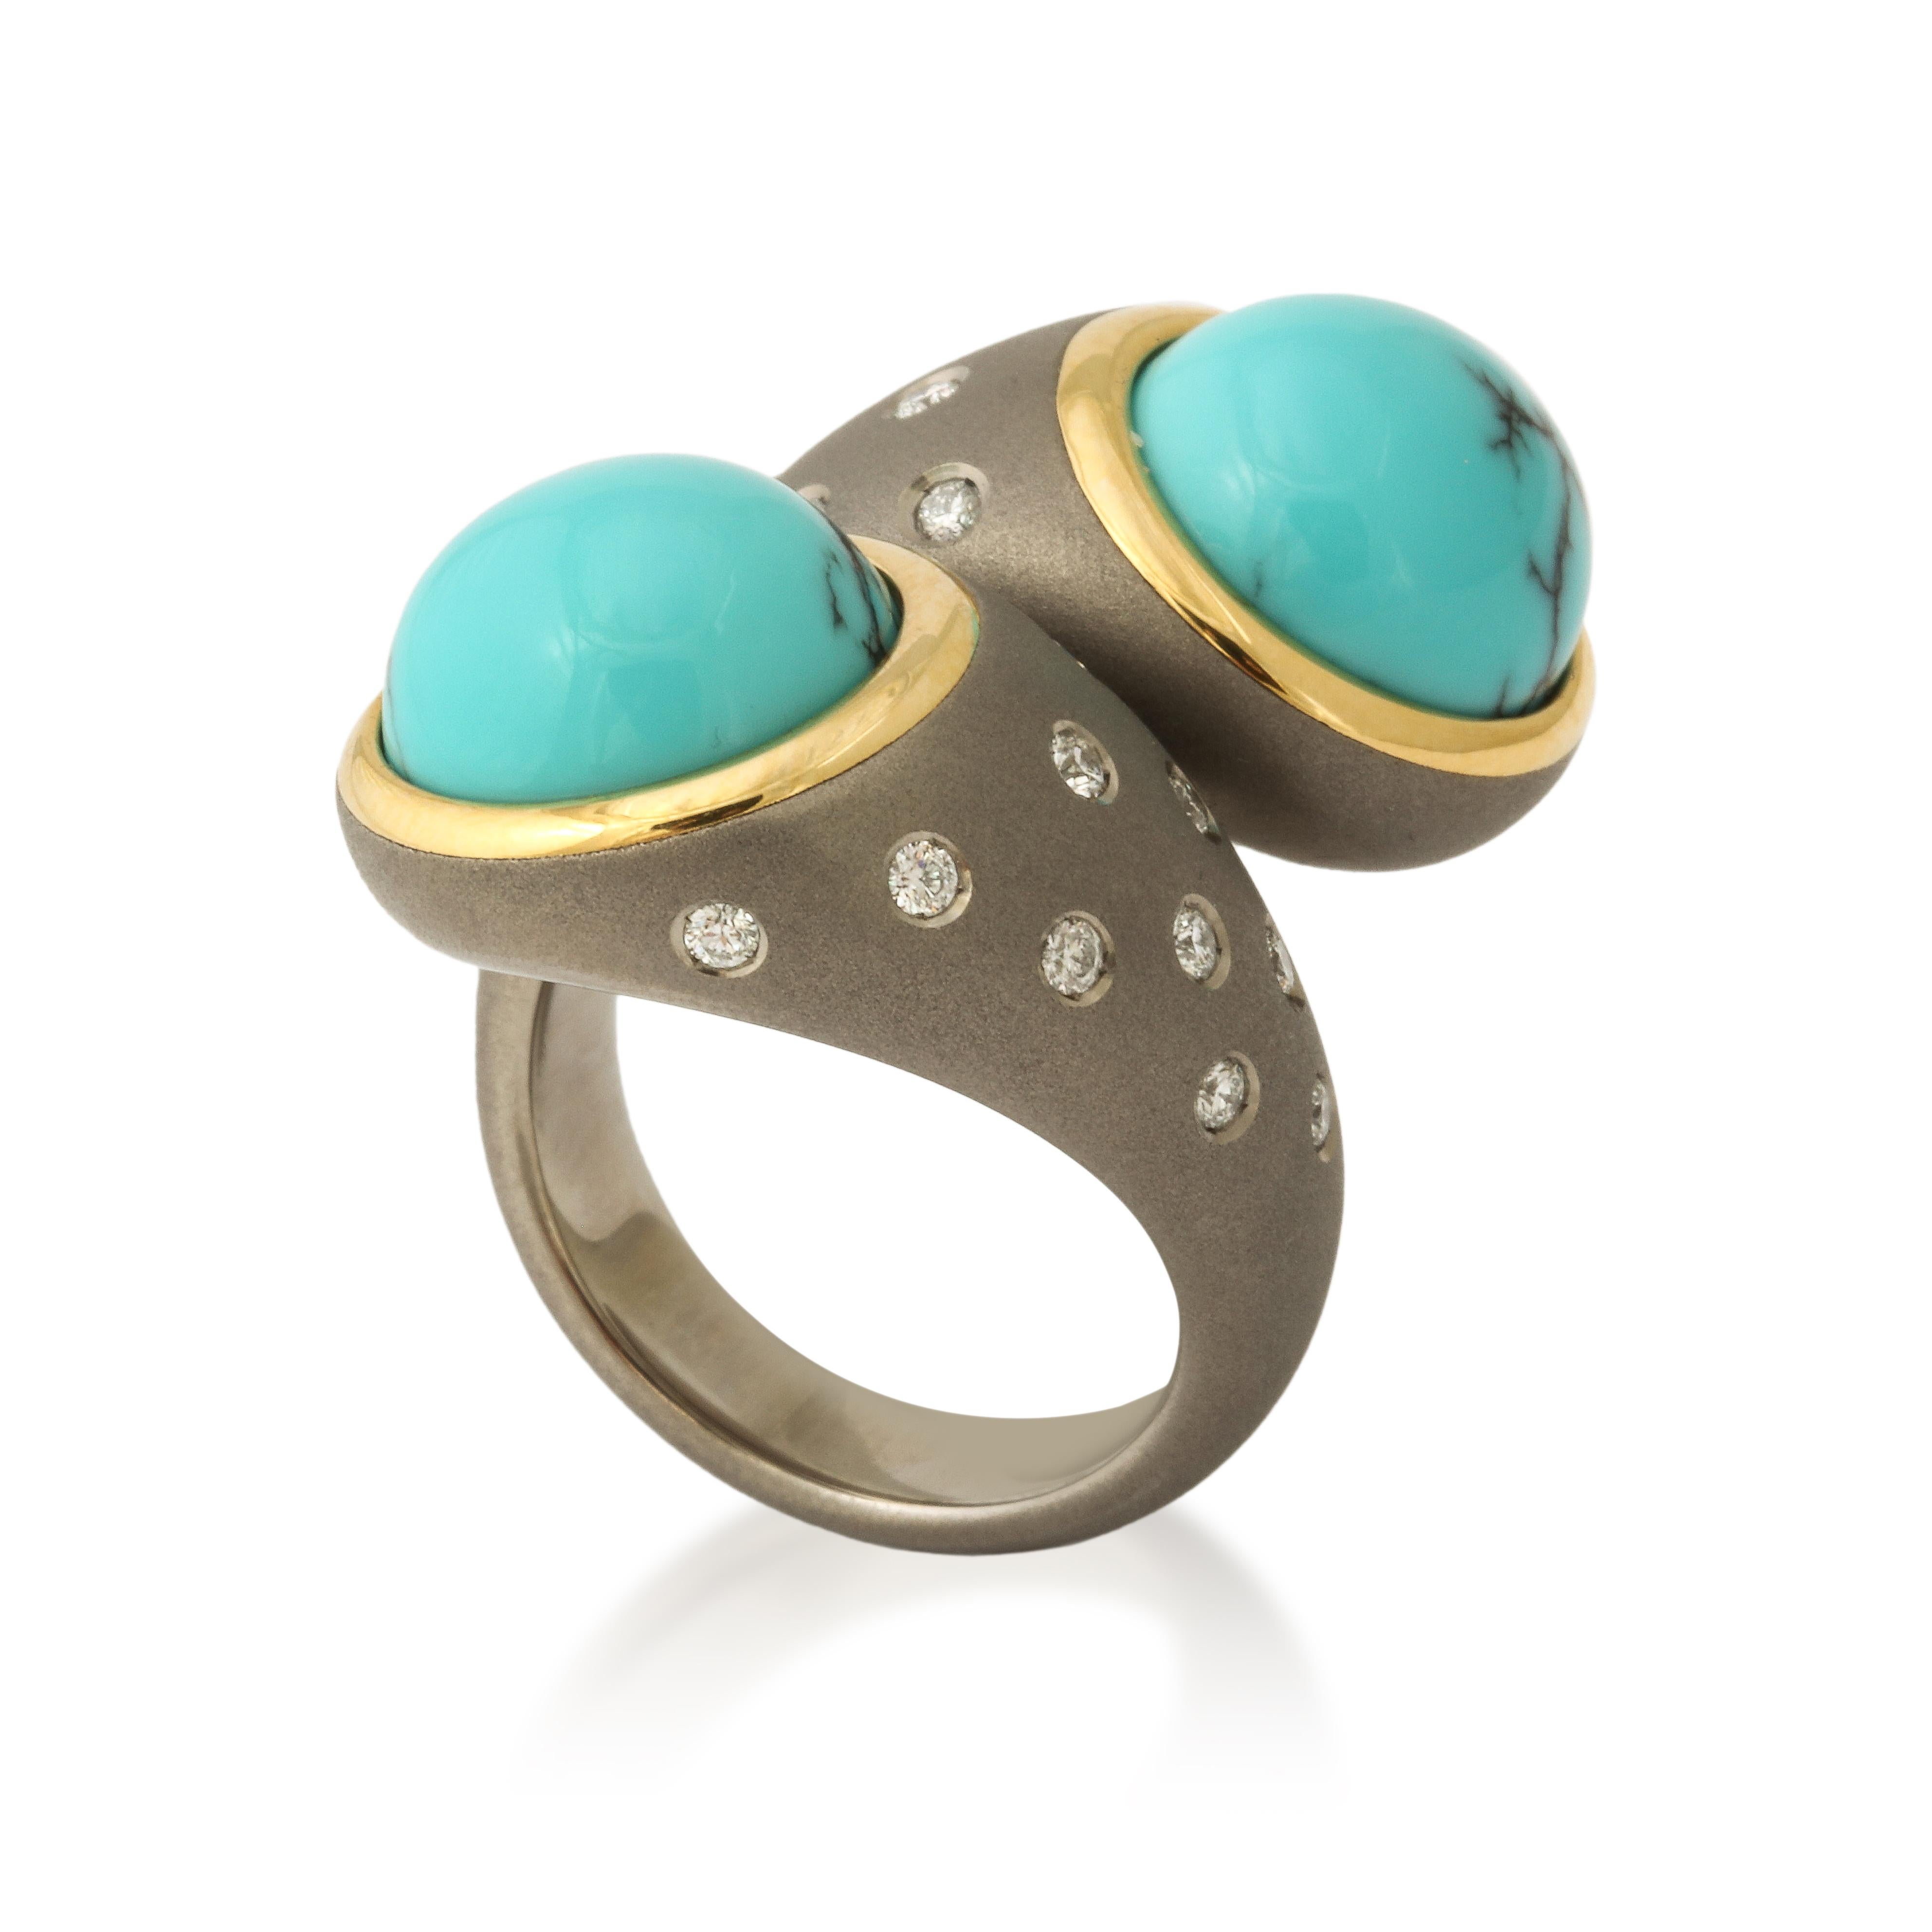 This ring embodies the perfect combination of nature and contemporary design with the beautiful pair of turquoise cabochons, revealing just a trace of their original black matrix, mounted in titanium.  For extra flair the mounting is set with